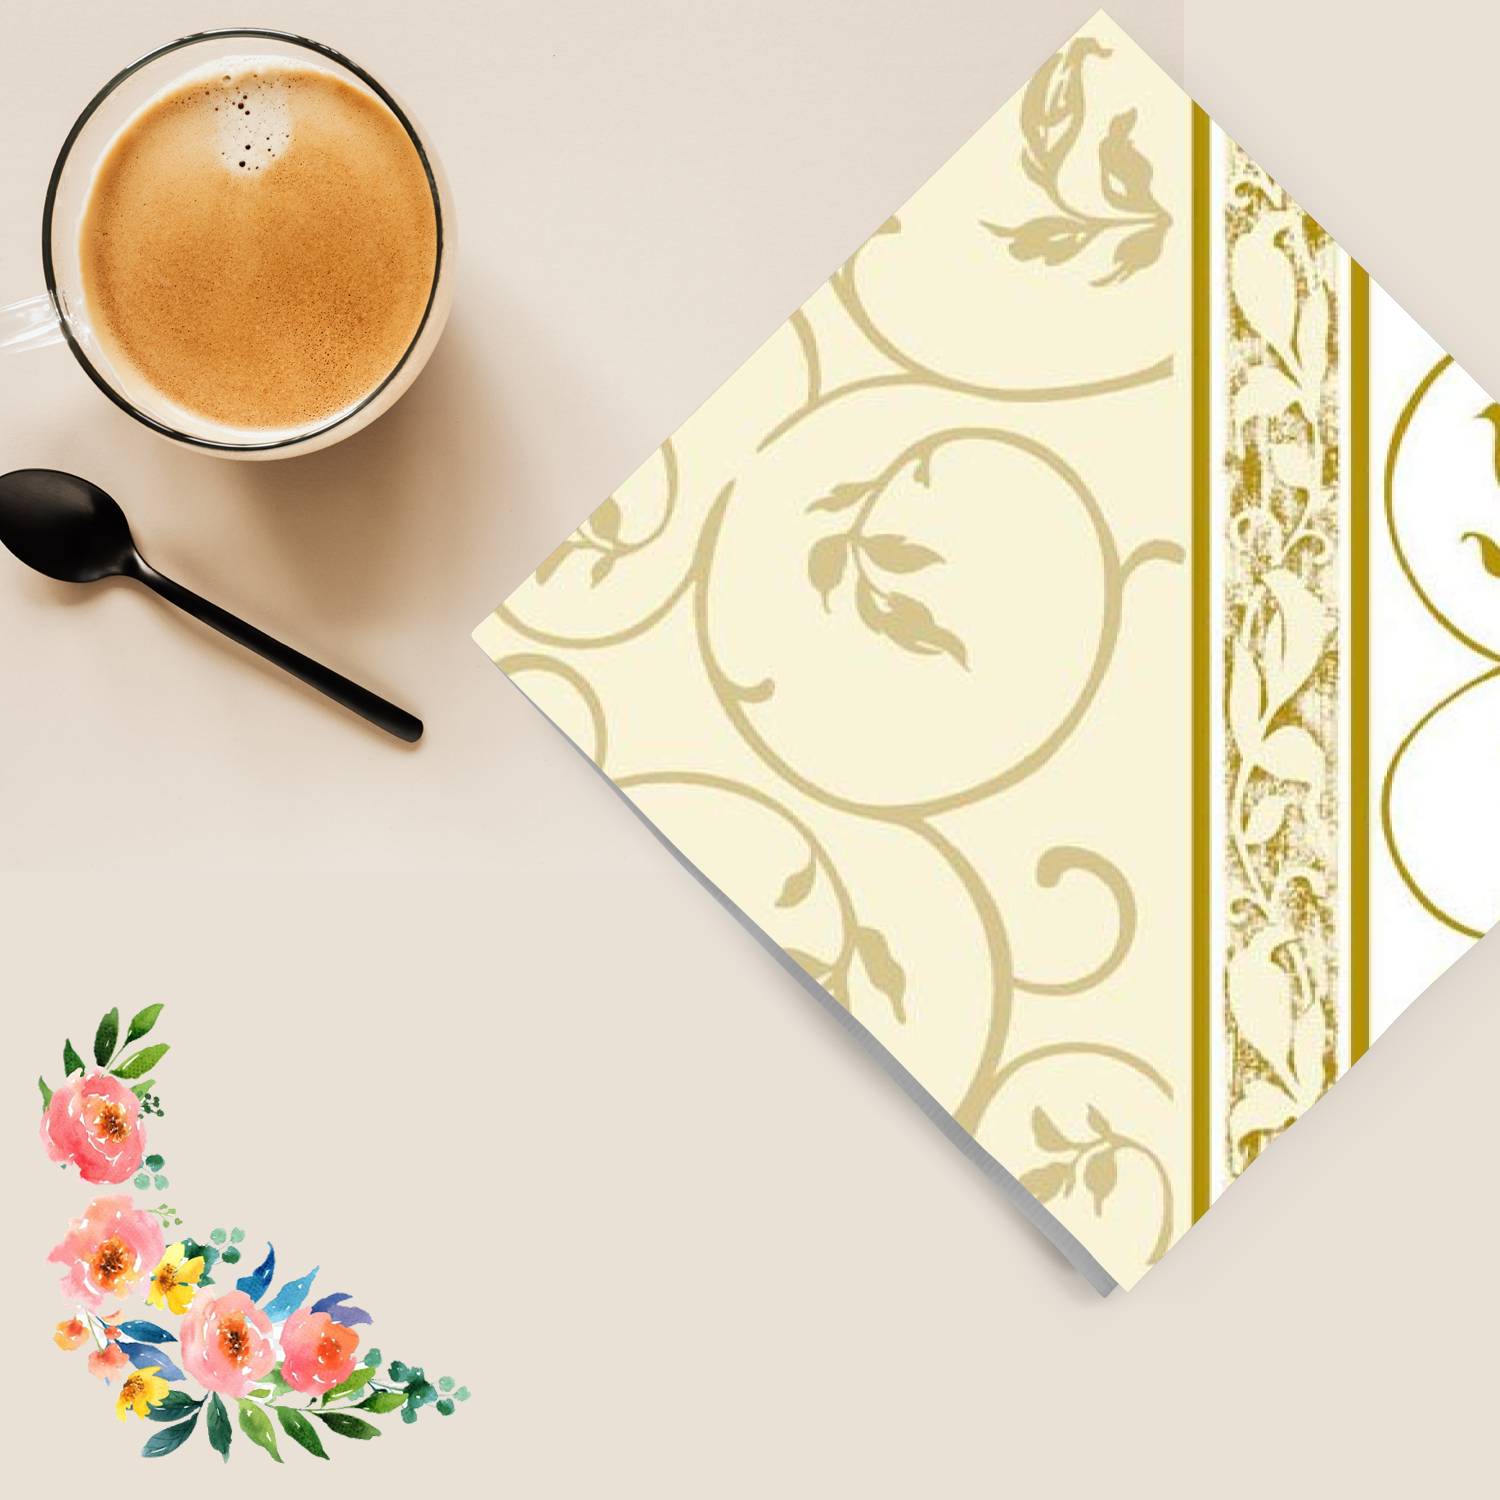 Golden Curlicue 1 Disposable Lunch Paper Napkins 20 Ct Tablesettings Nicole Fantini Collection   